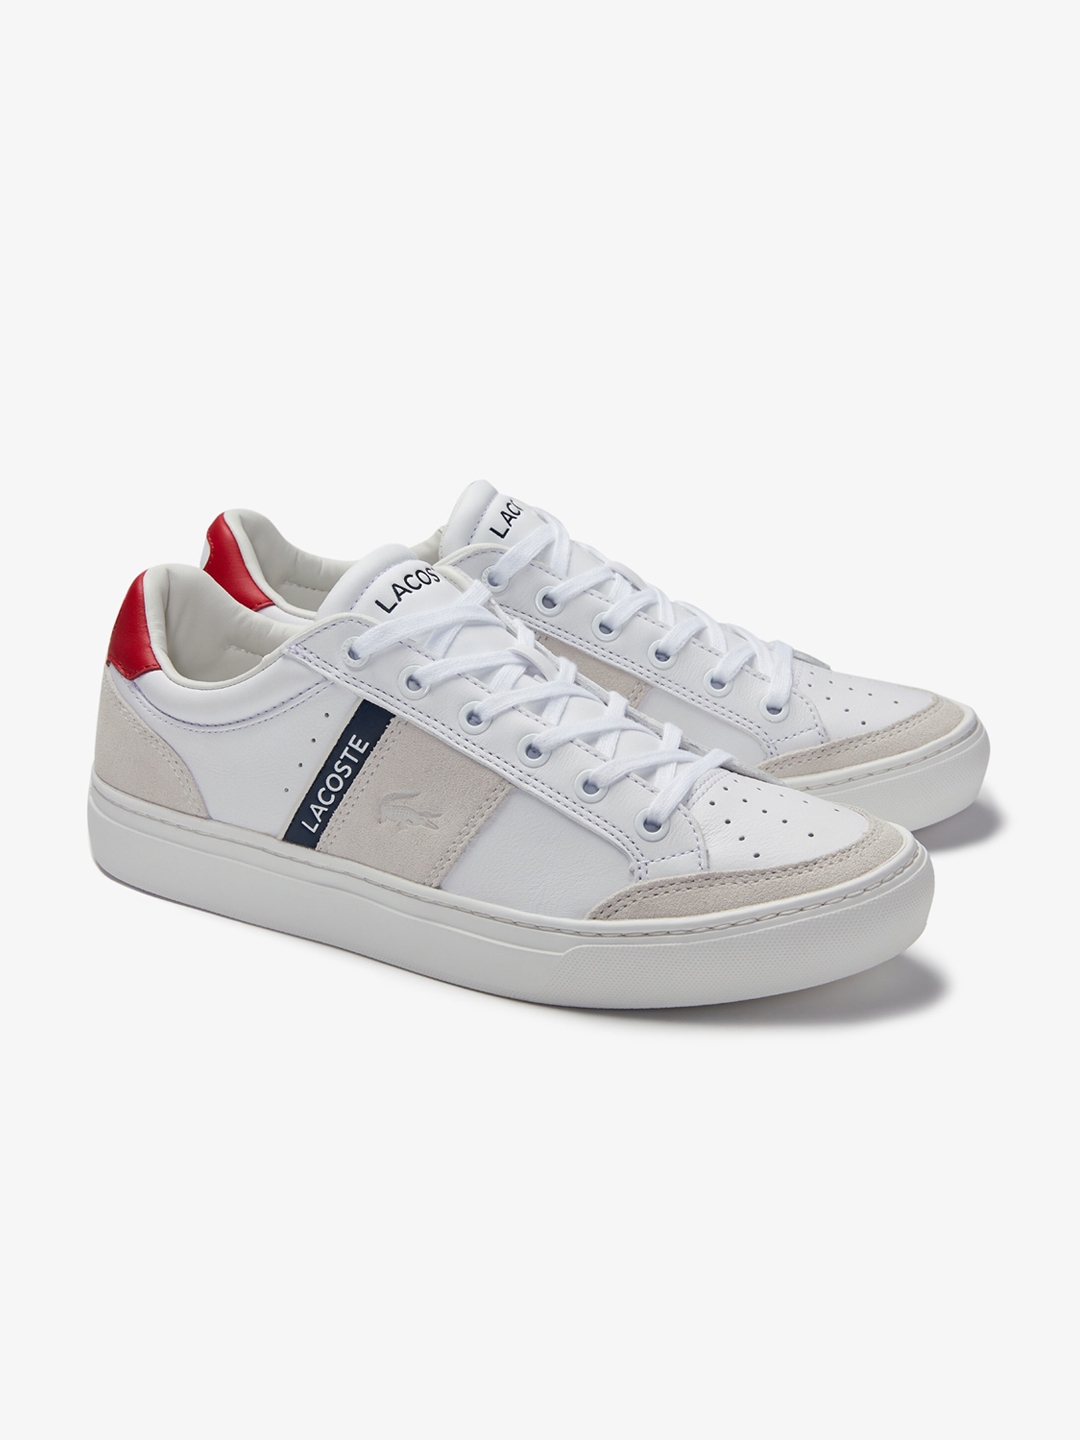 Buy Lacoste Men White Sneakers - Casual Shoes for Men 13430890 | Myntra